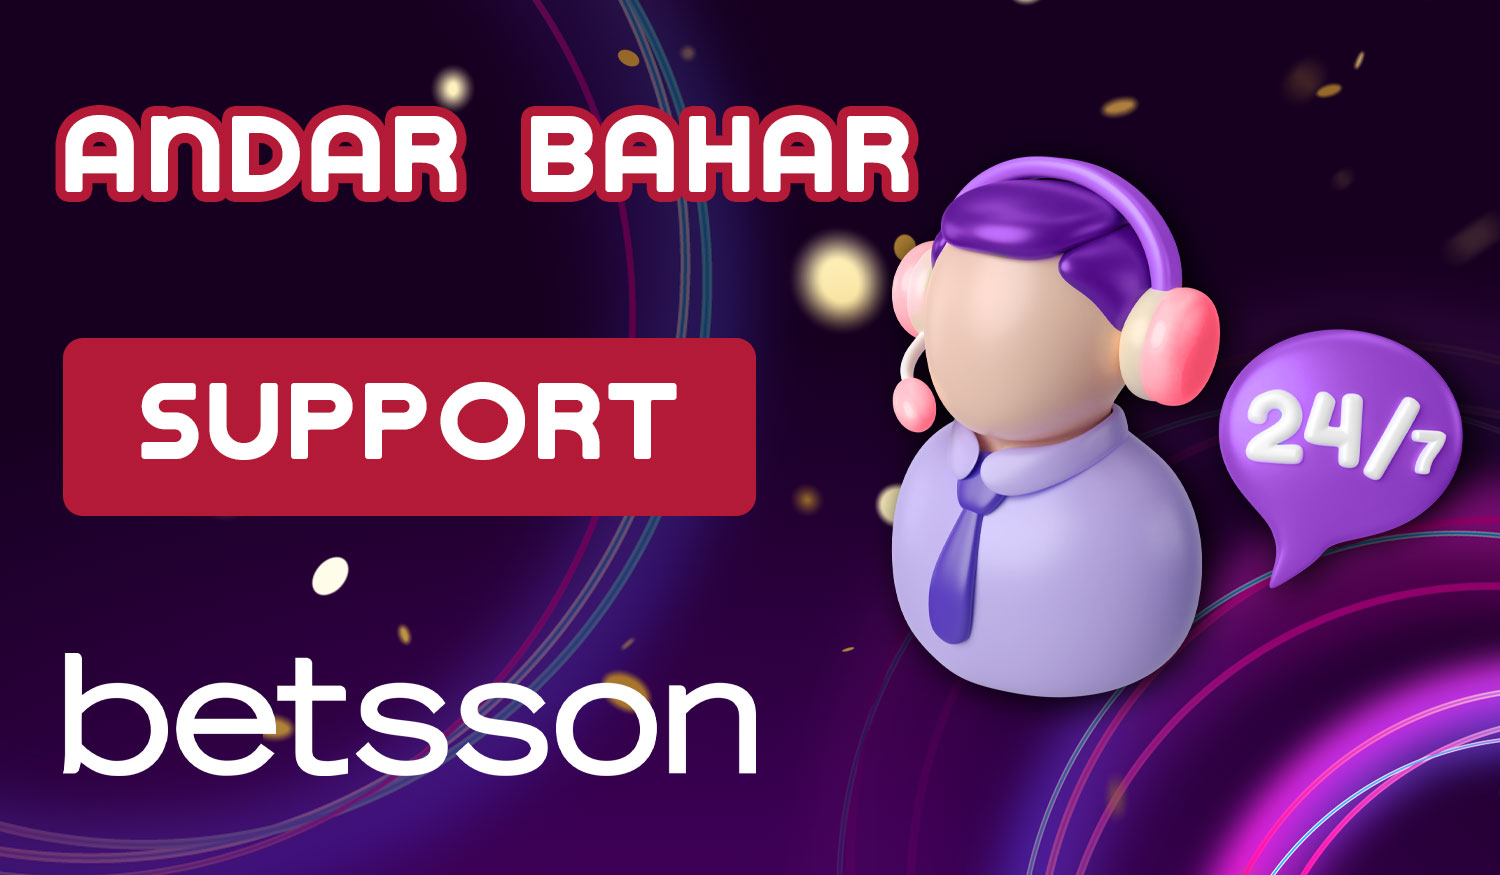 Betsson India's customer support team is ready to help Andar Bahar players with any inquiries or issues they might encounter